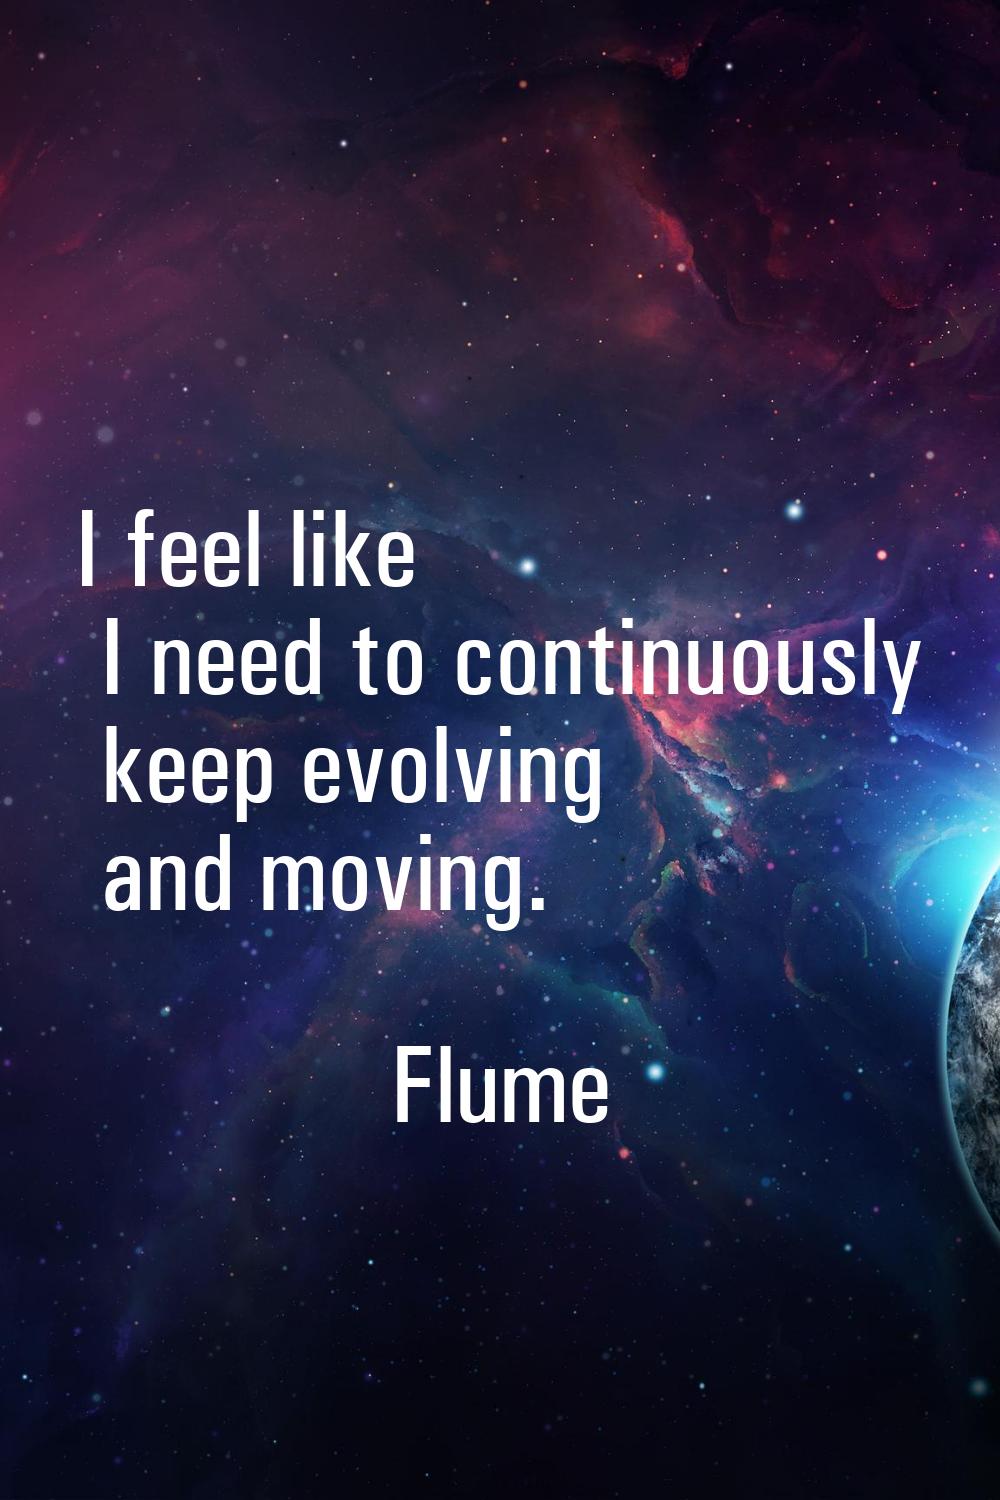 I feel like I need to continuously keep evolving and moving.